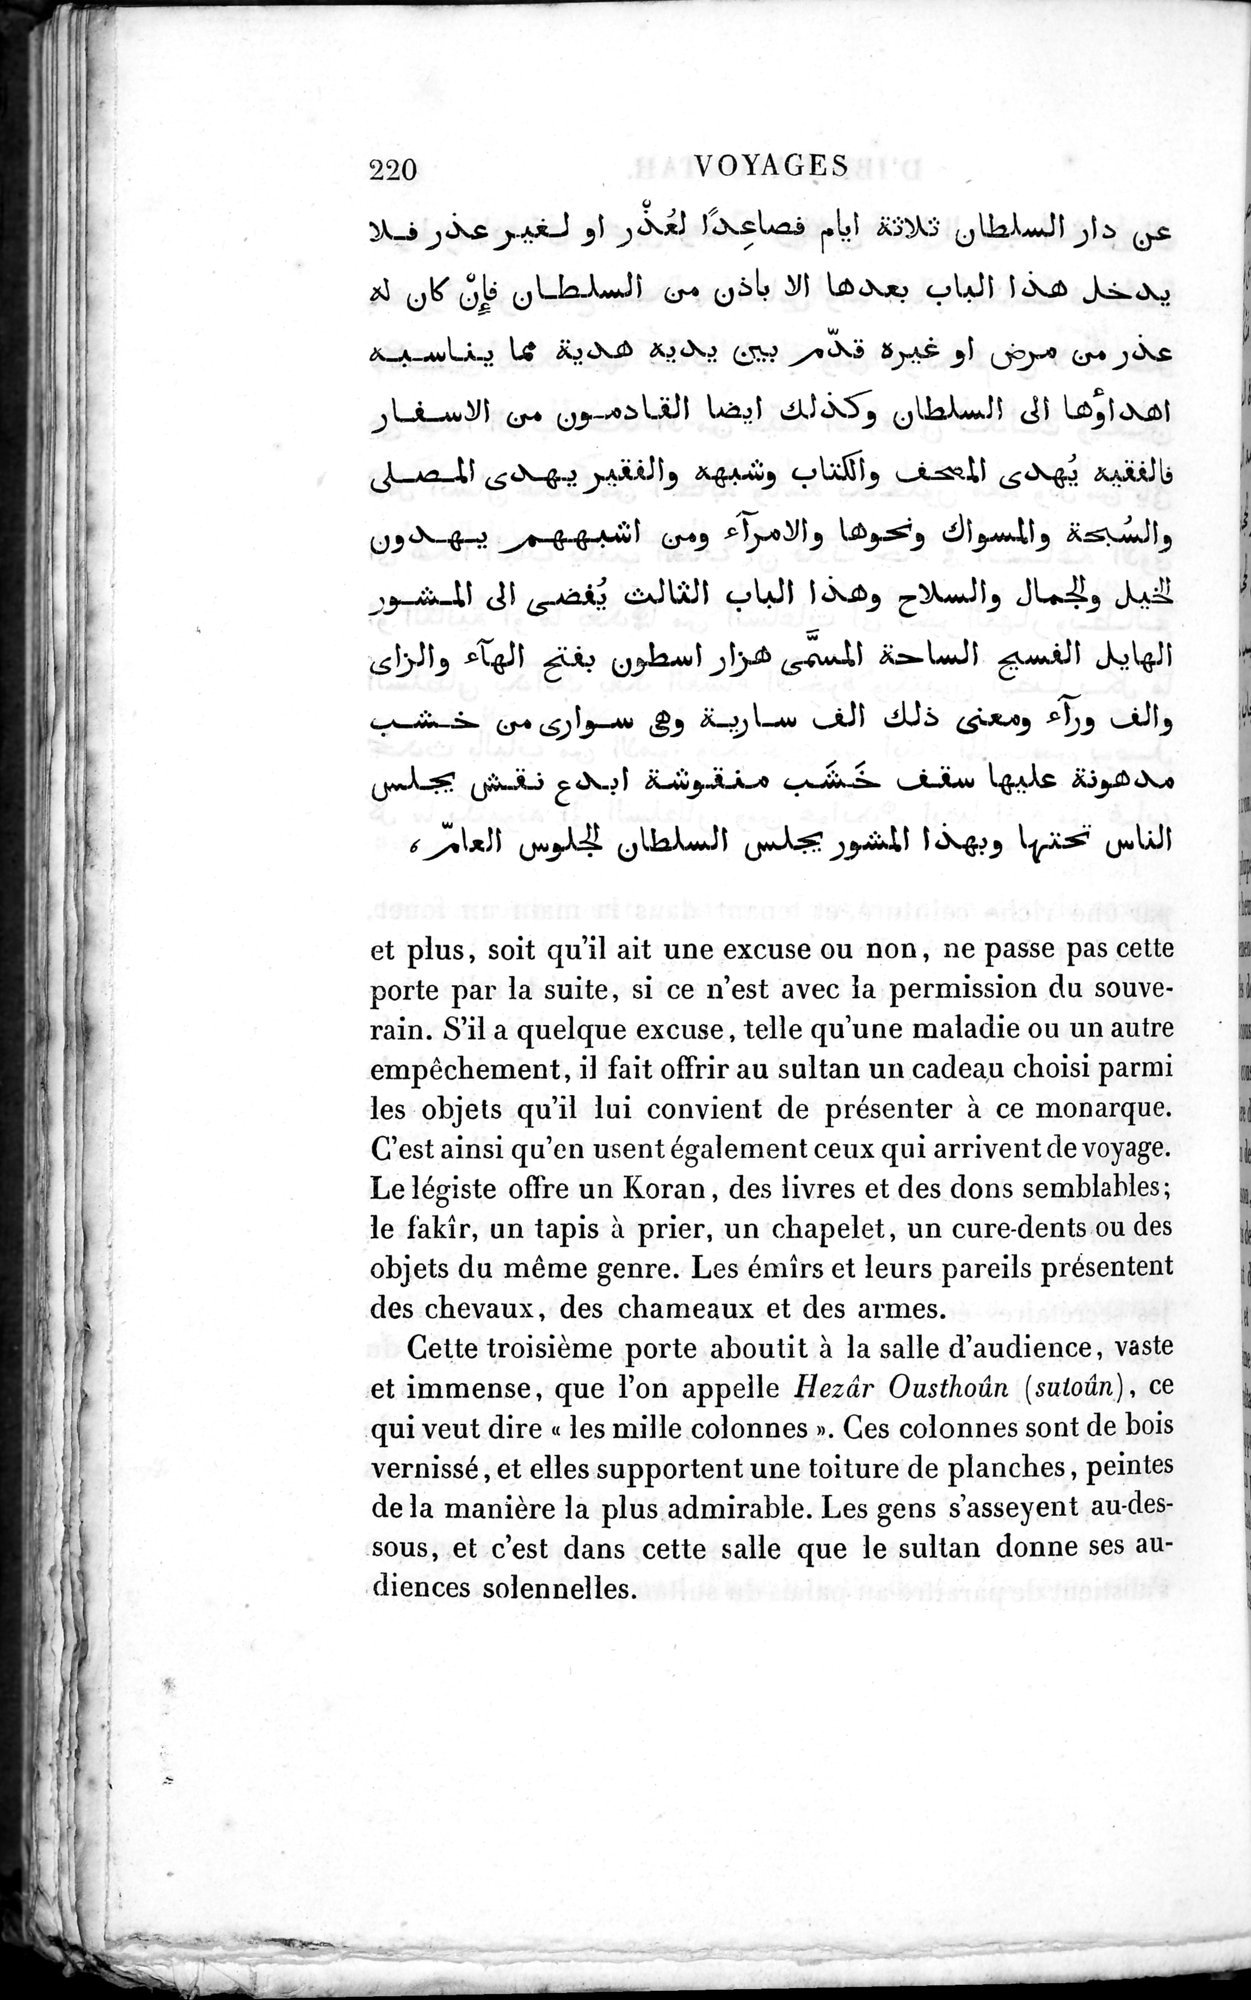 Voyages d'Ibn Batoutah : vol.3 / Page 260 (Grayscale High Resolution Image)